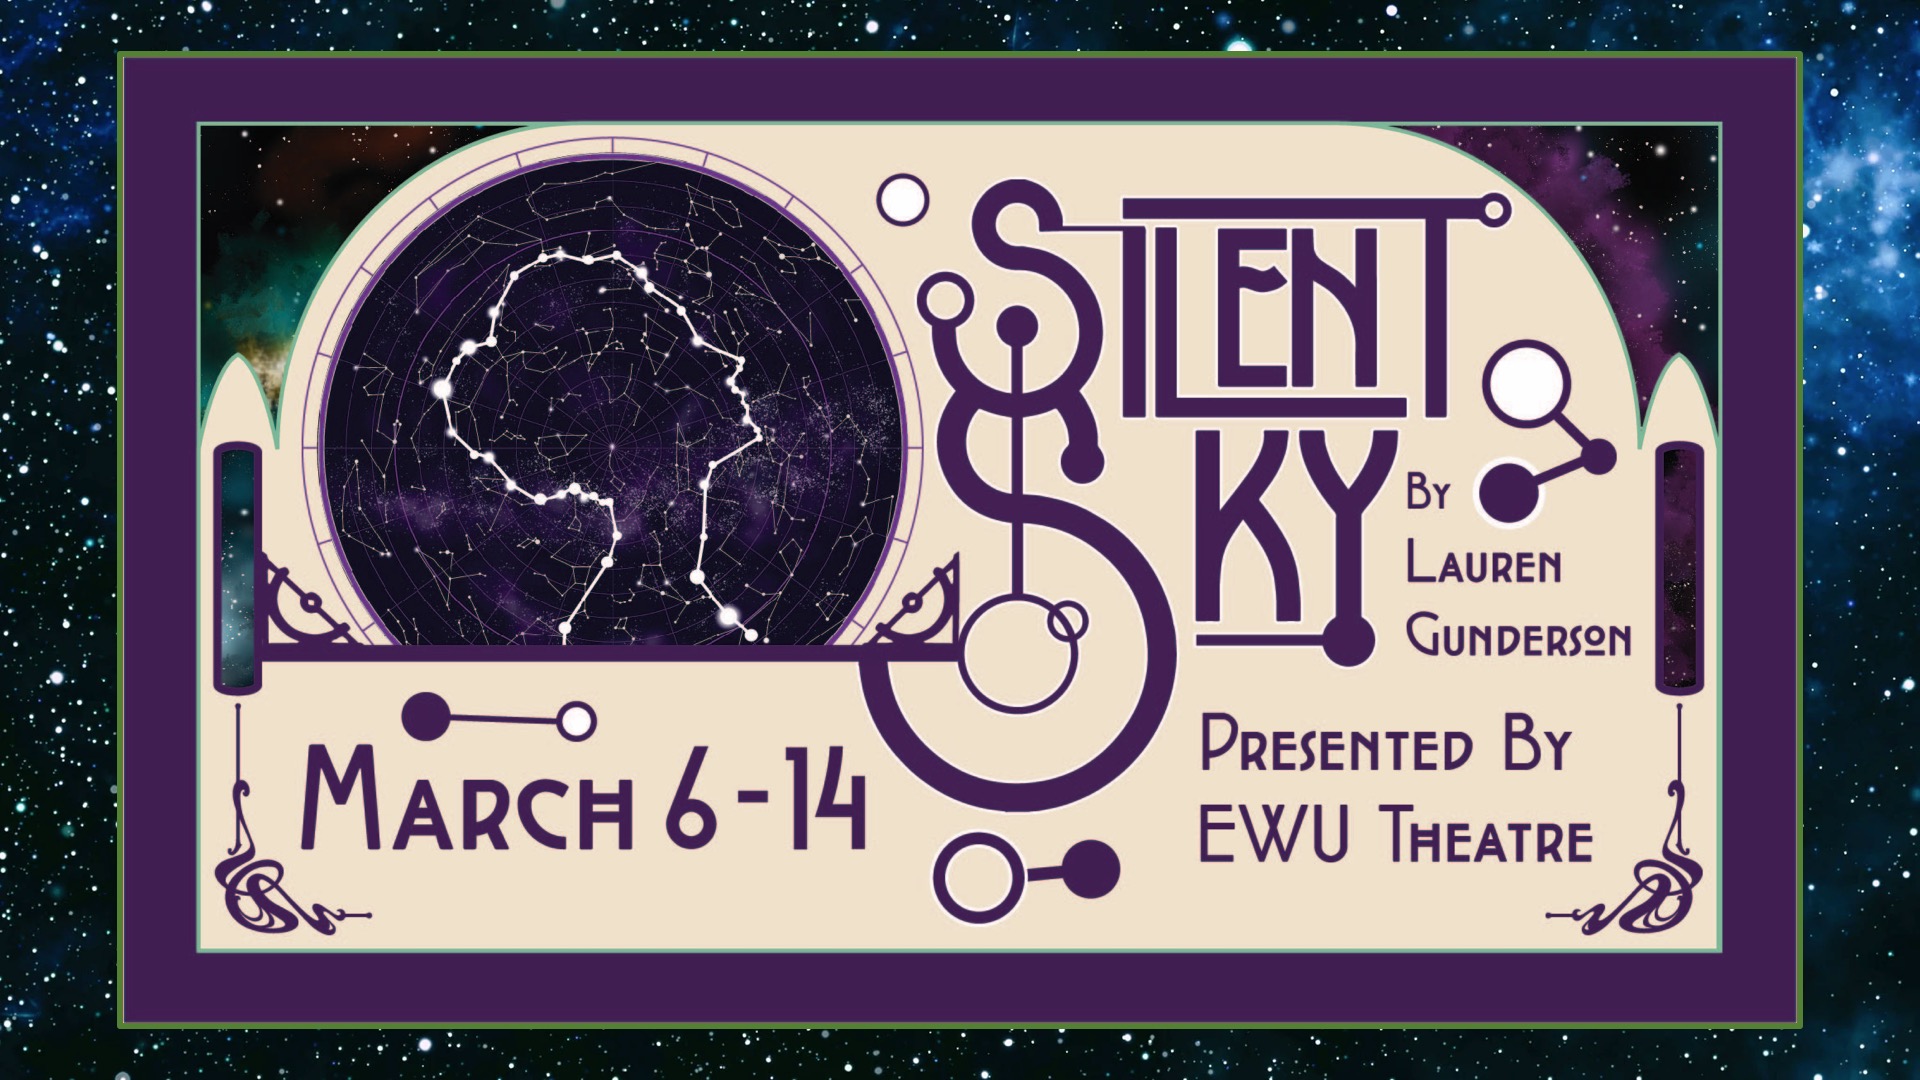 Silent Sky with dates March 6-14